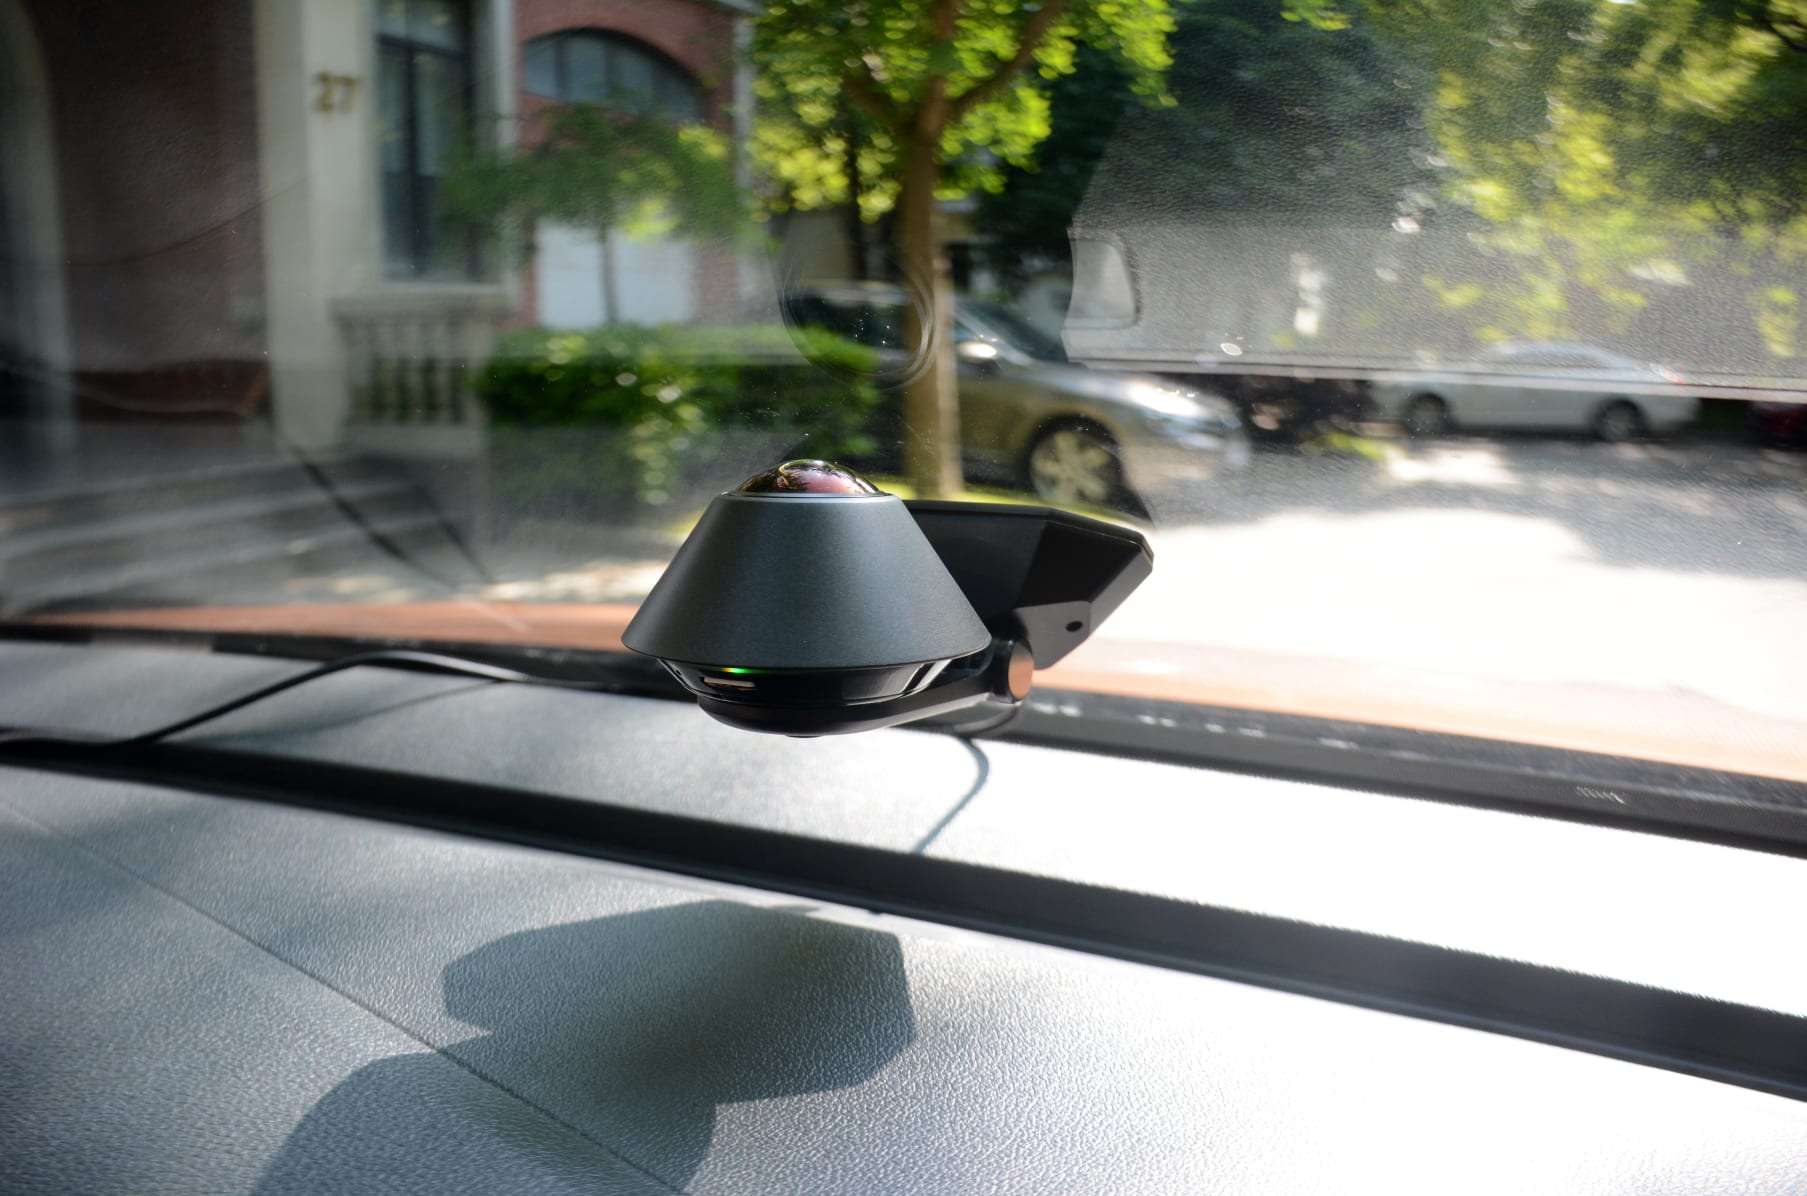 secure 360 camera for car